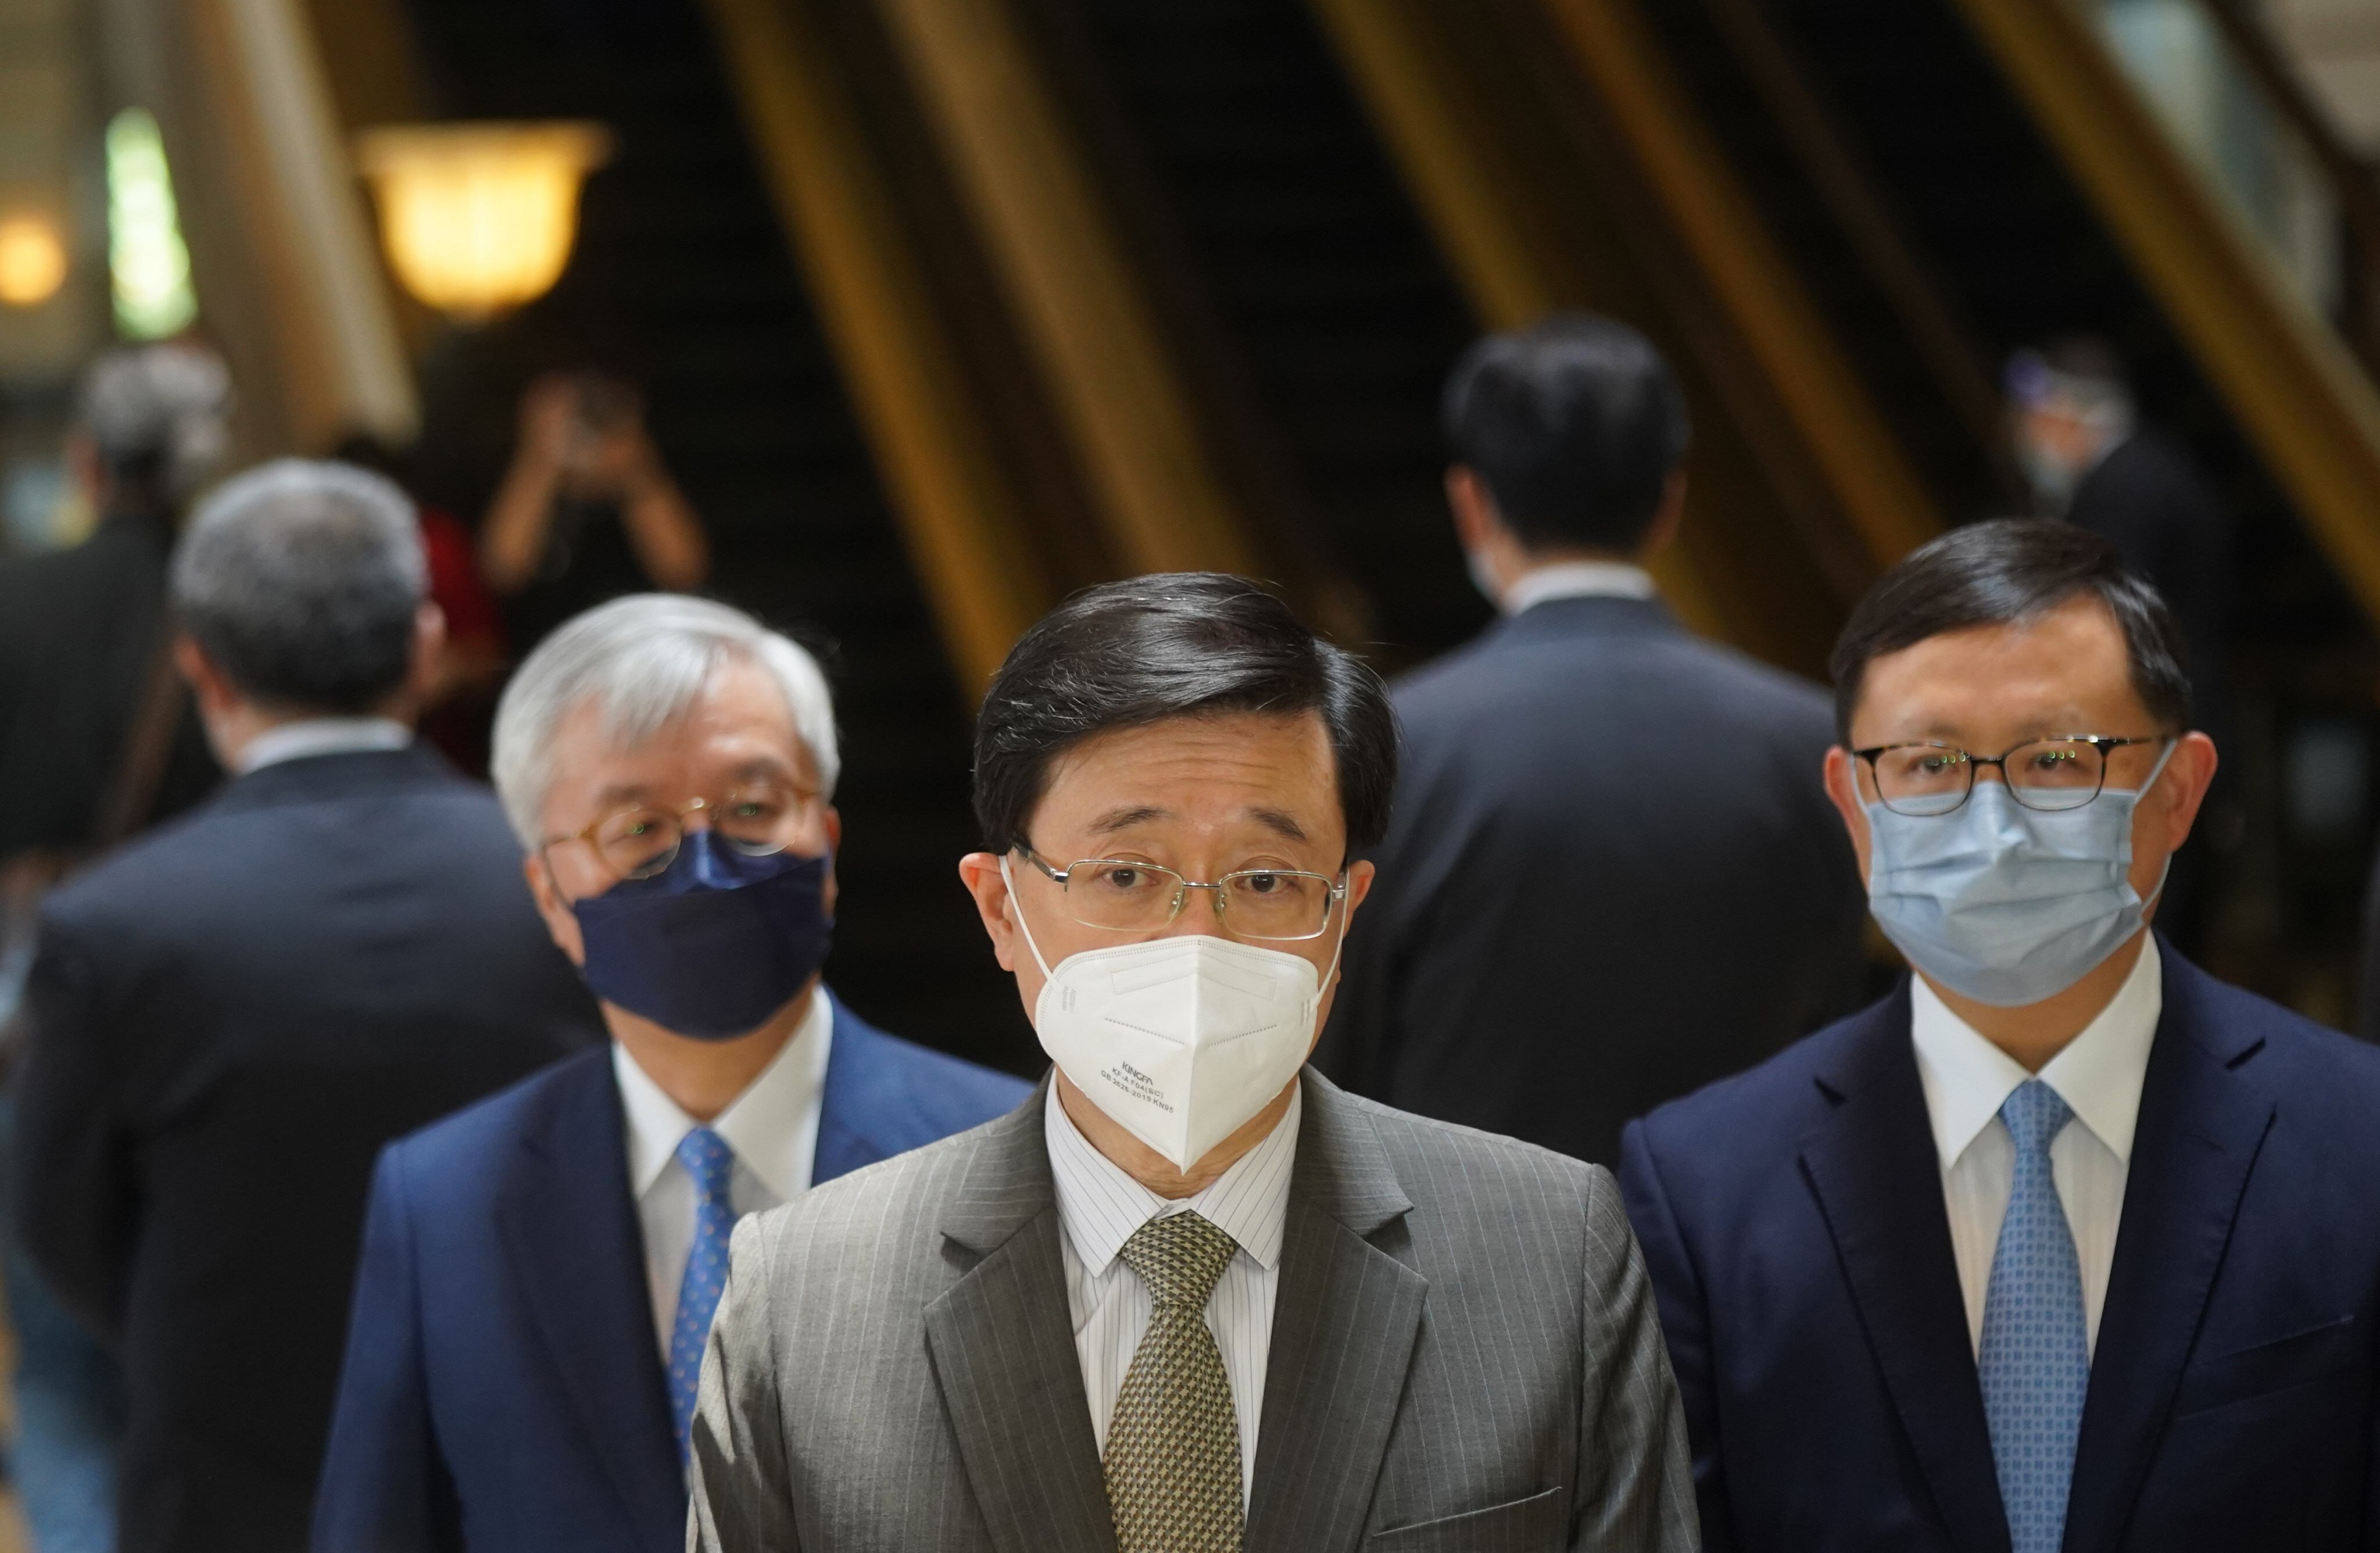 Chief Executive hopeful John Lee has referred to the UK’s decision to withdraw its judges from the city’s top court as polluting the legal system. Photo: Sam Tsang